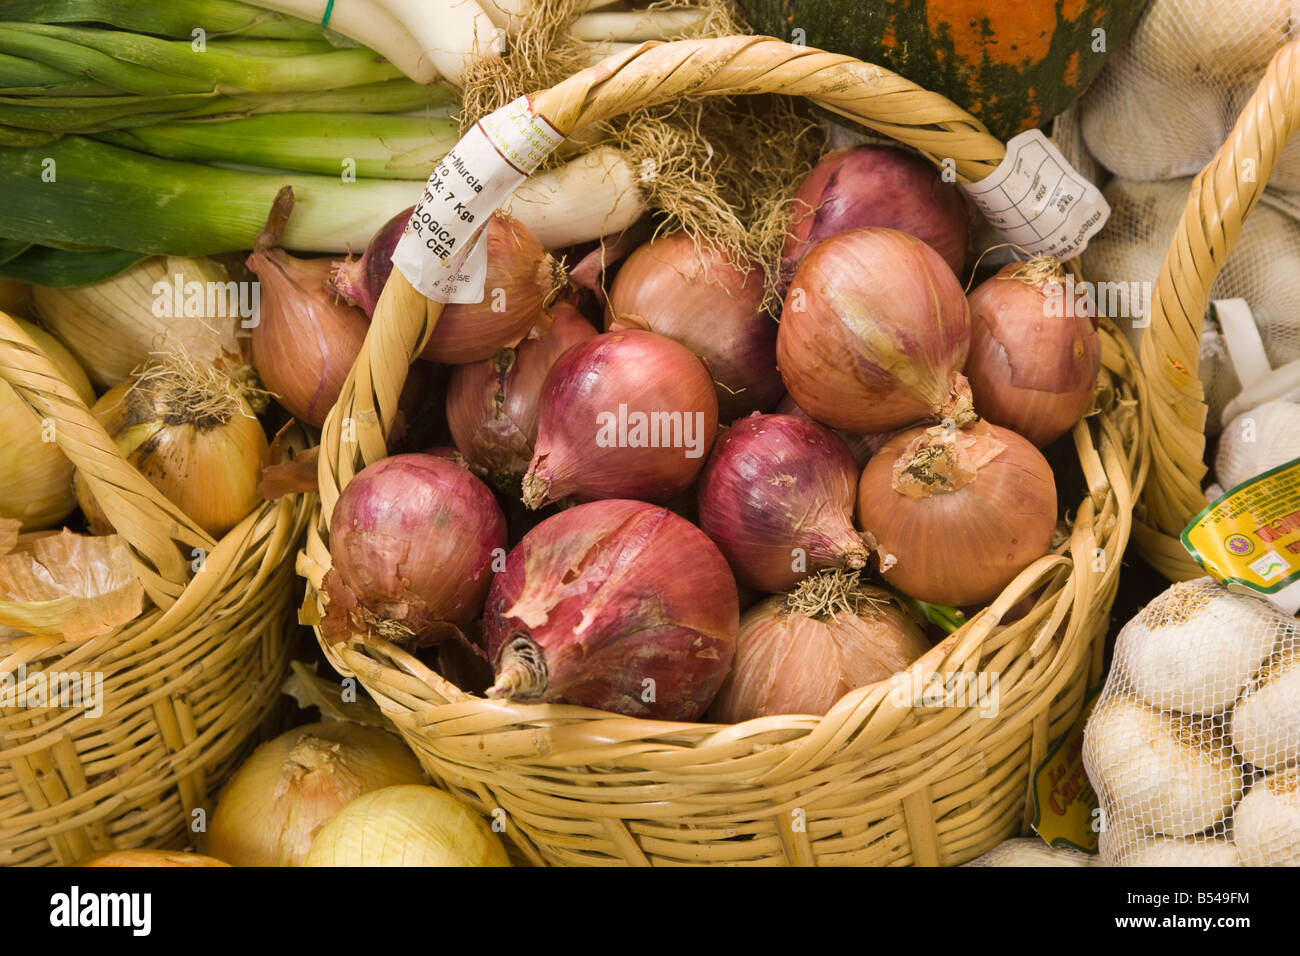 Basket of ecologically grown onions in health food shop Stock Photo